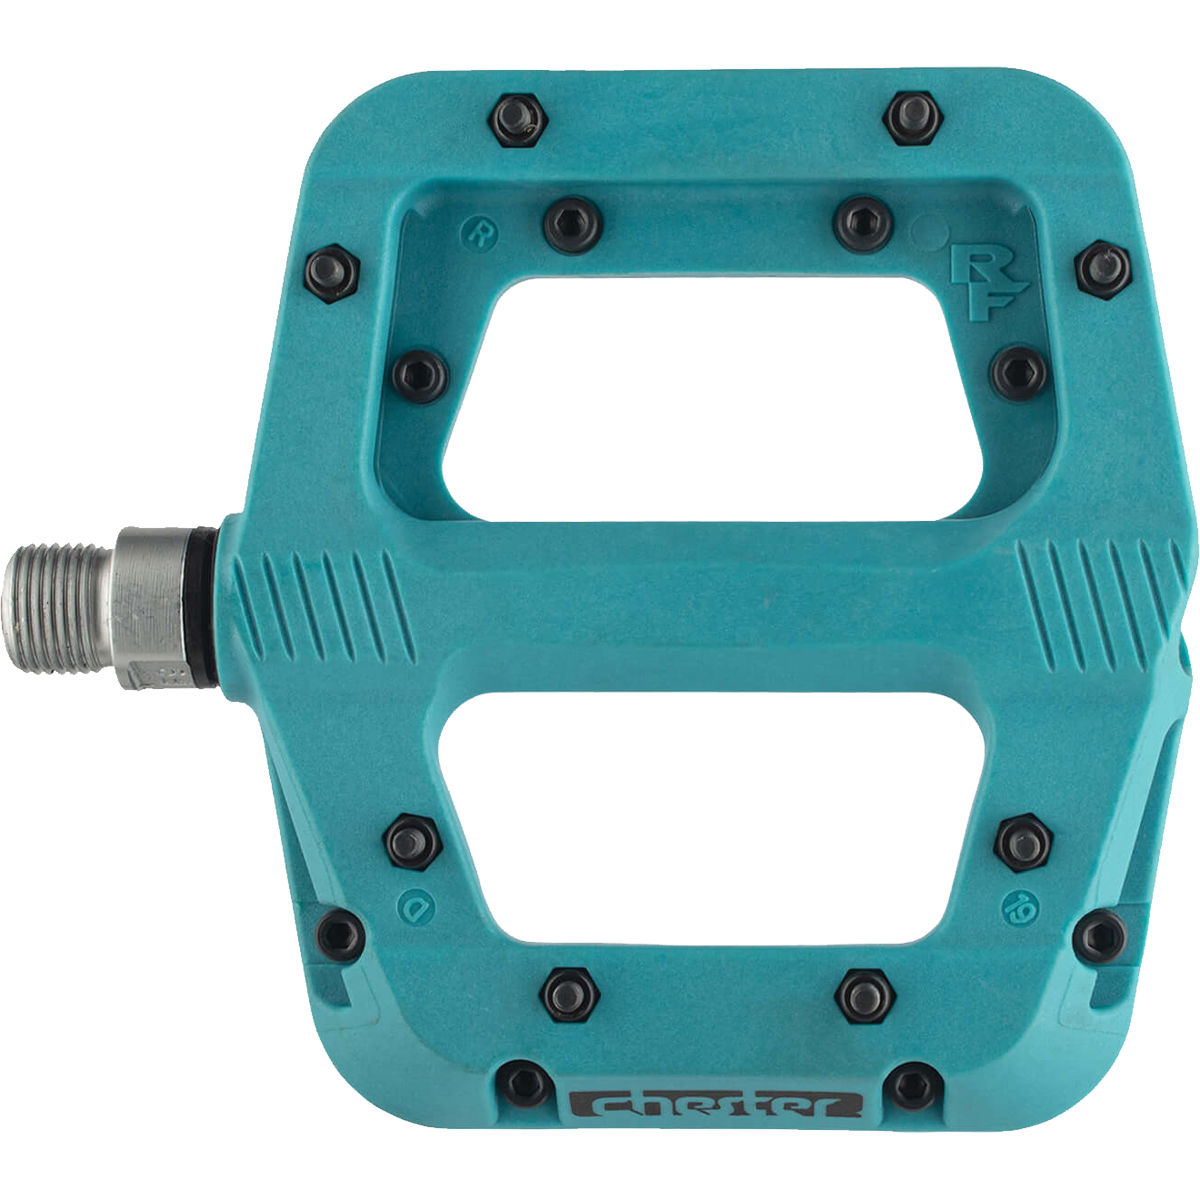 Chester 9/16 Turquoise Platform Pedal alternate view